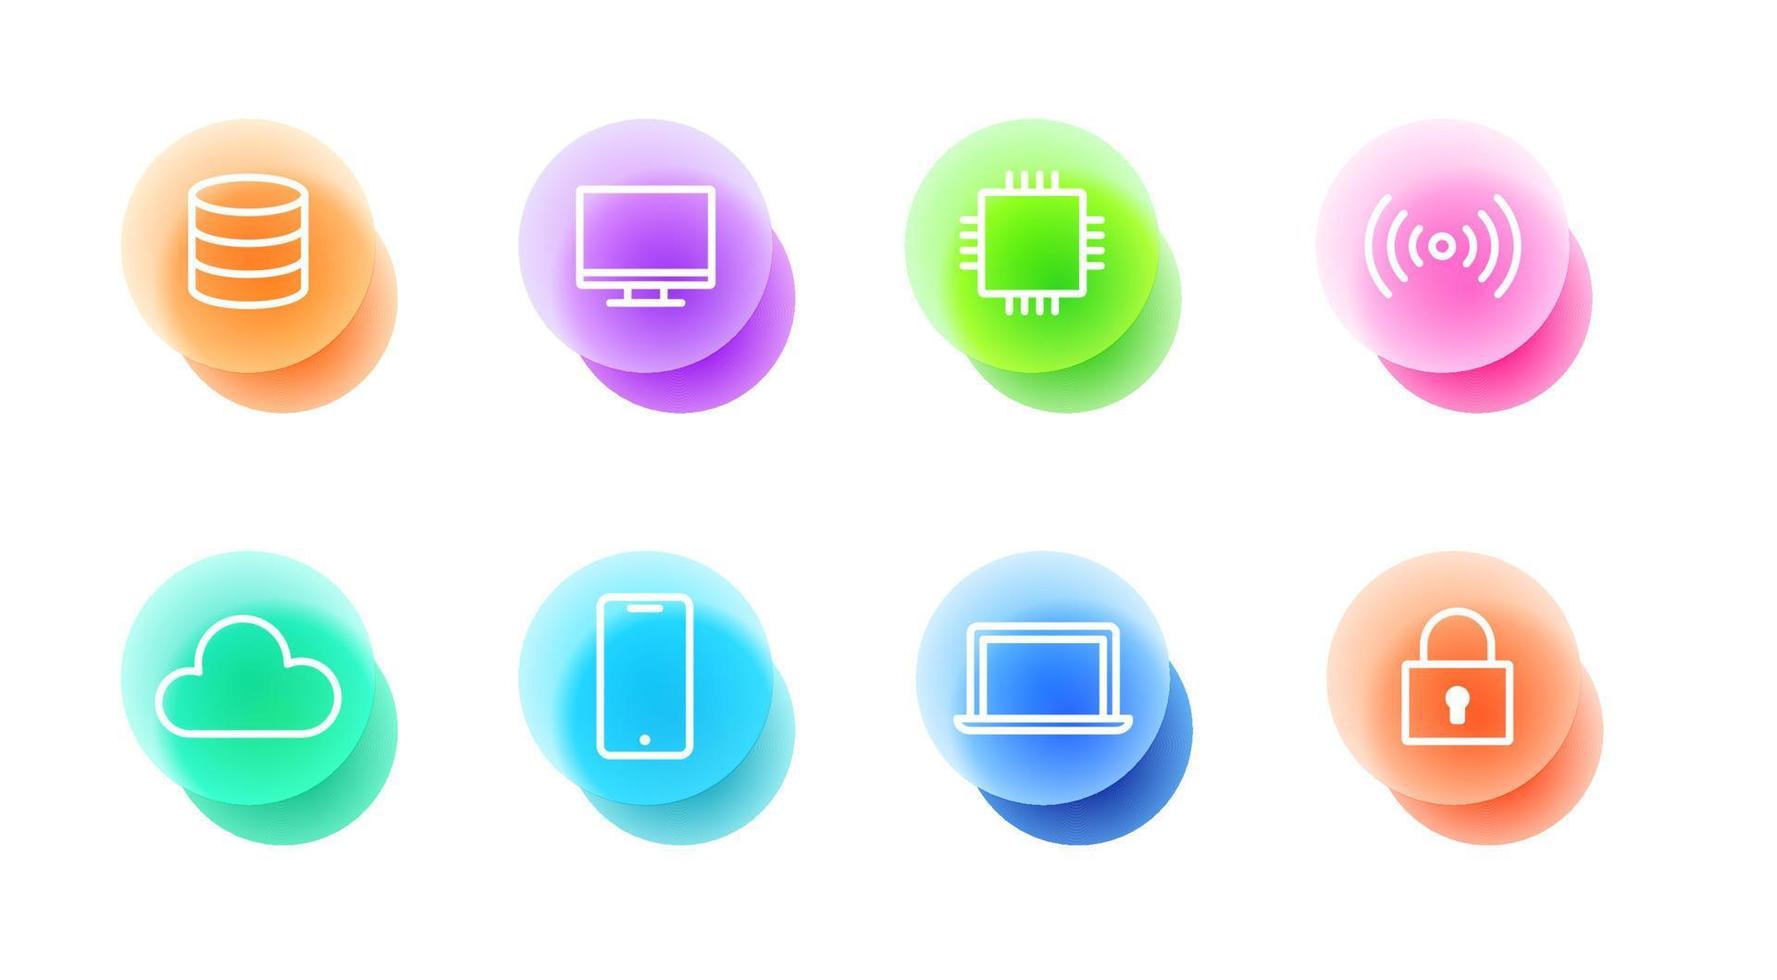 Technology icons set in glassmorphic style. Transparent blur glass effect icons. Vector illustration